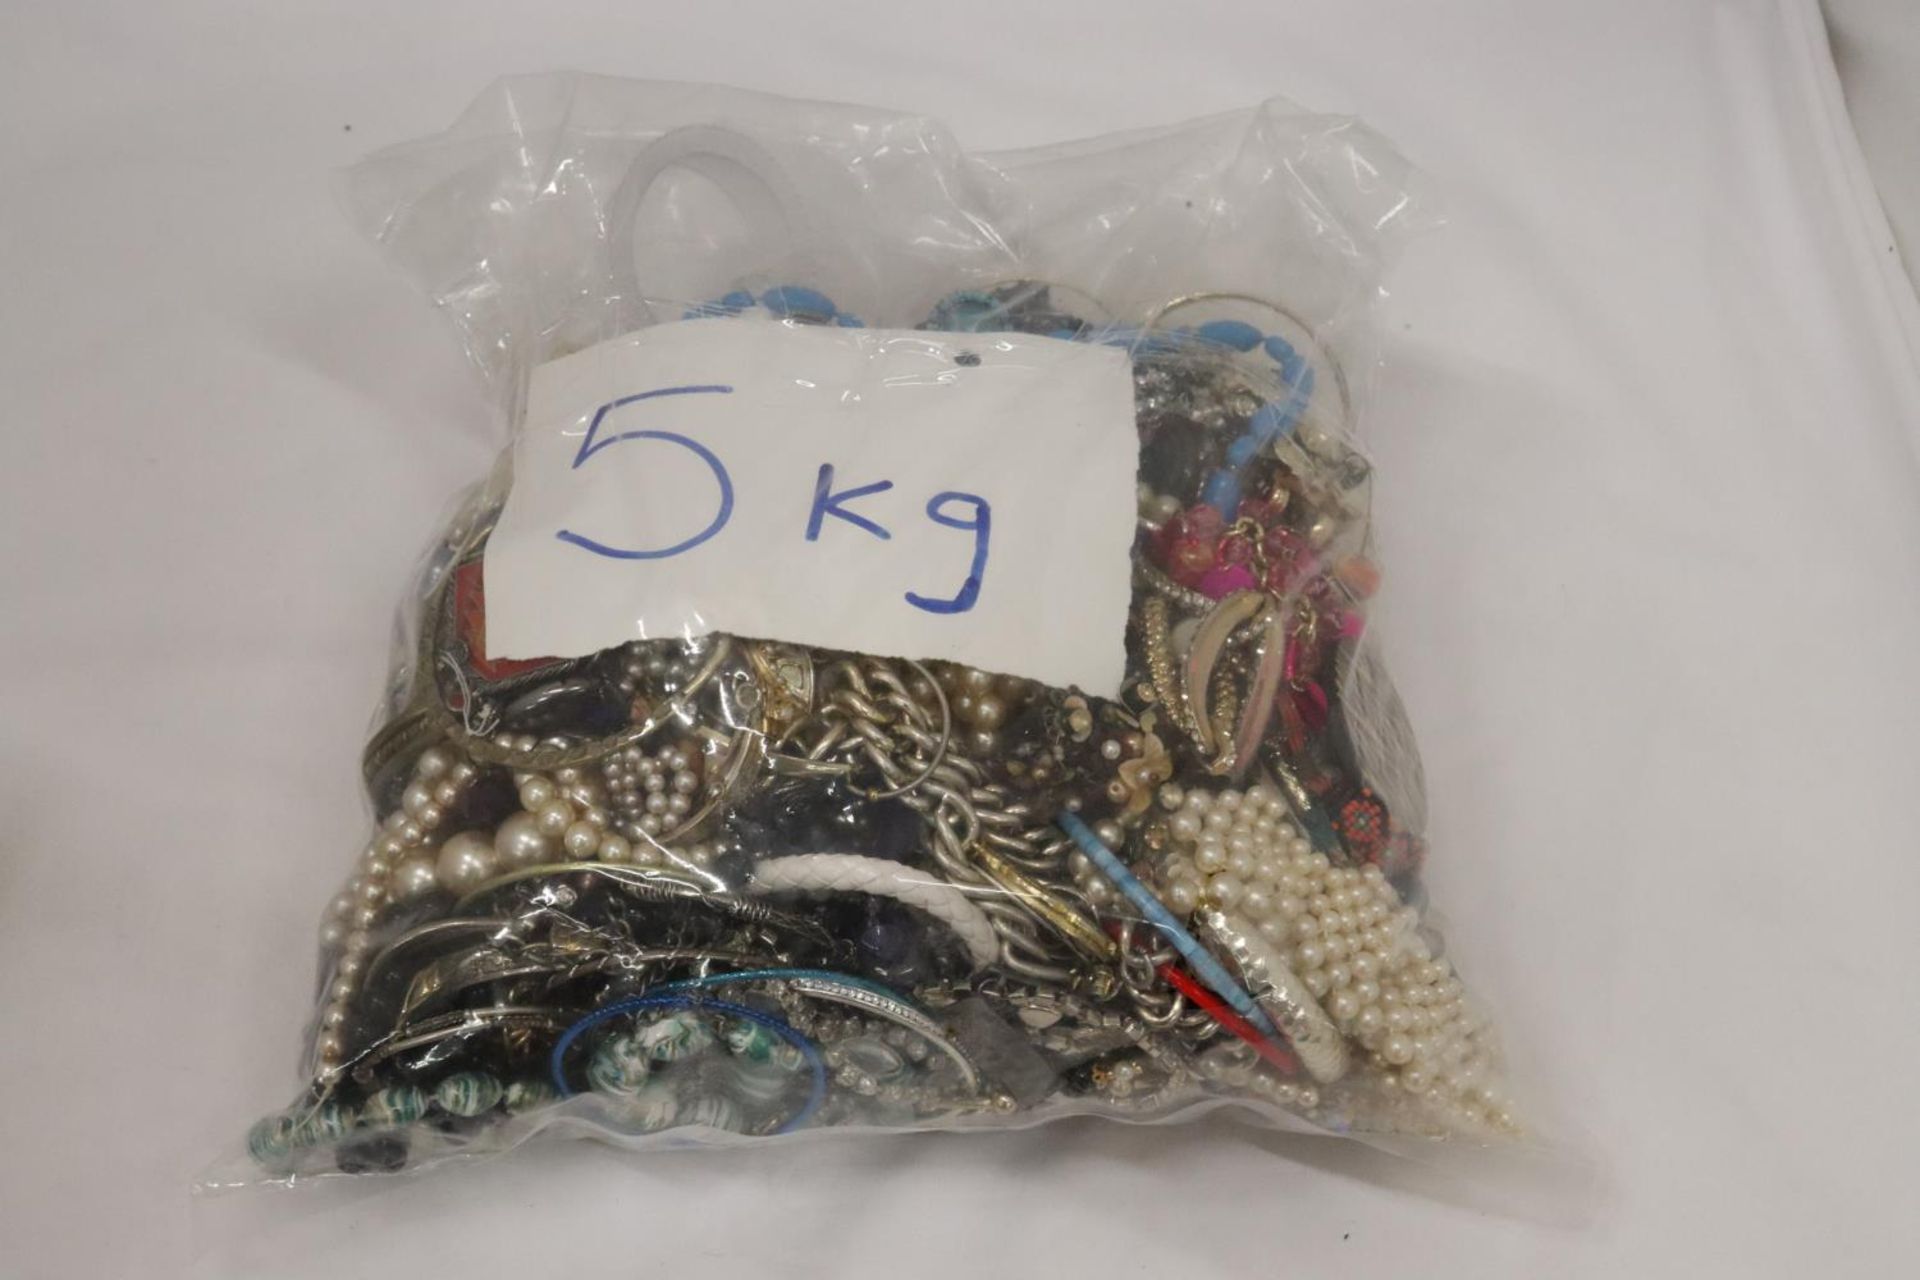 A LARGE QUANTITY OF COSTUME JEWELLERY - 5 KG IN TOTAL